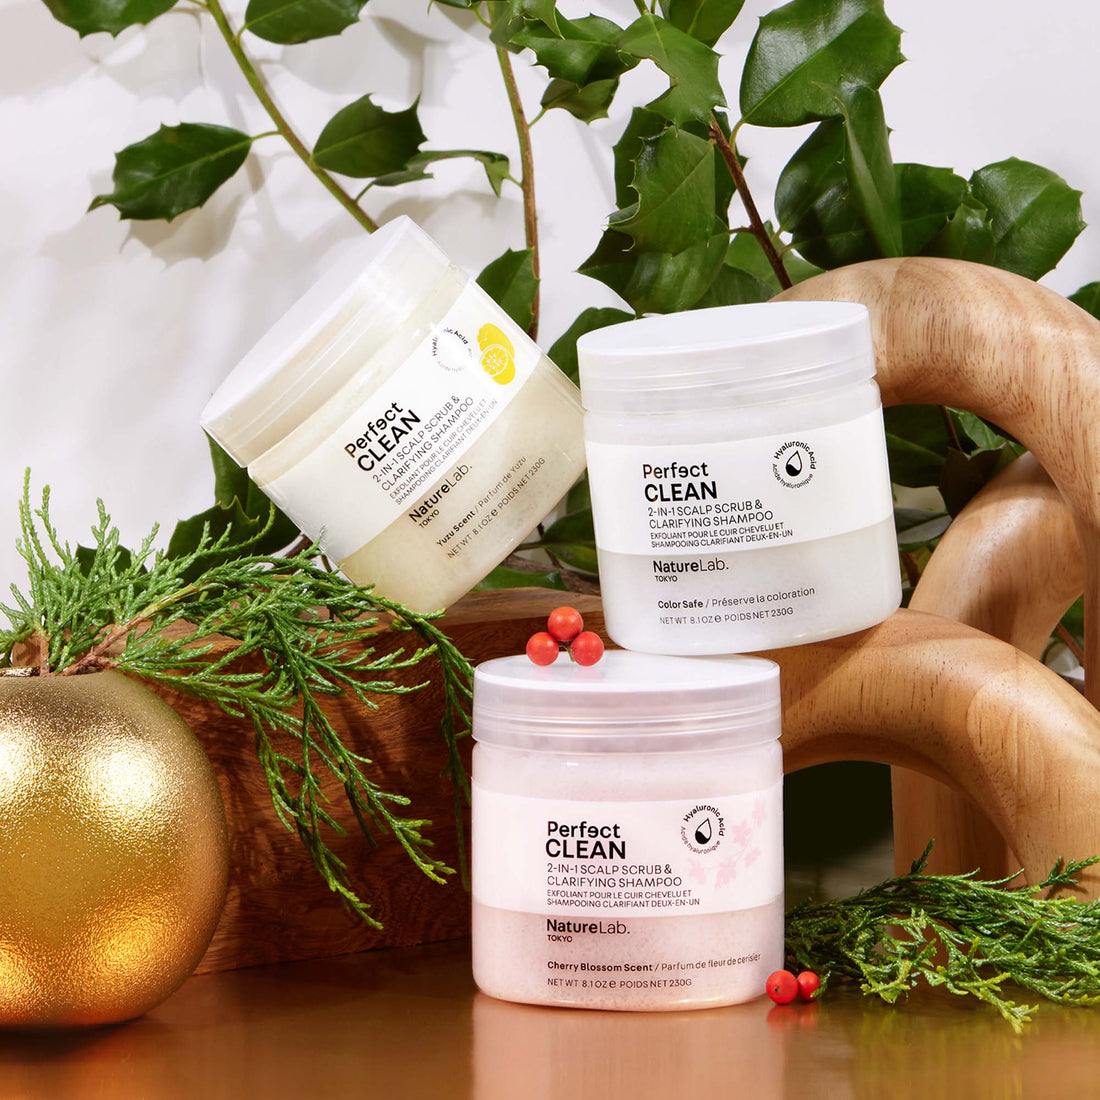 Three jars of the different scents of the Perfect Clean 2-in-1 Scalp Scrub & Clarifying Shampoo, stacked on abstract wooden structures and planters. Holly berries, green plants and branches, and a circular gold planter add a festive touch.